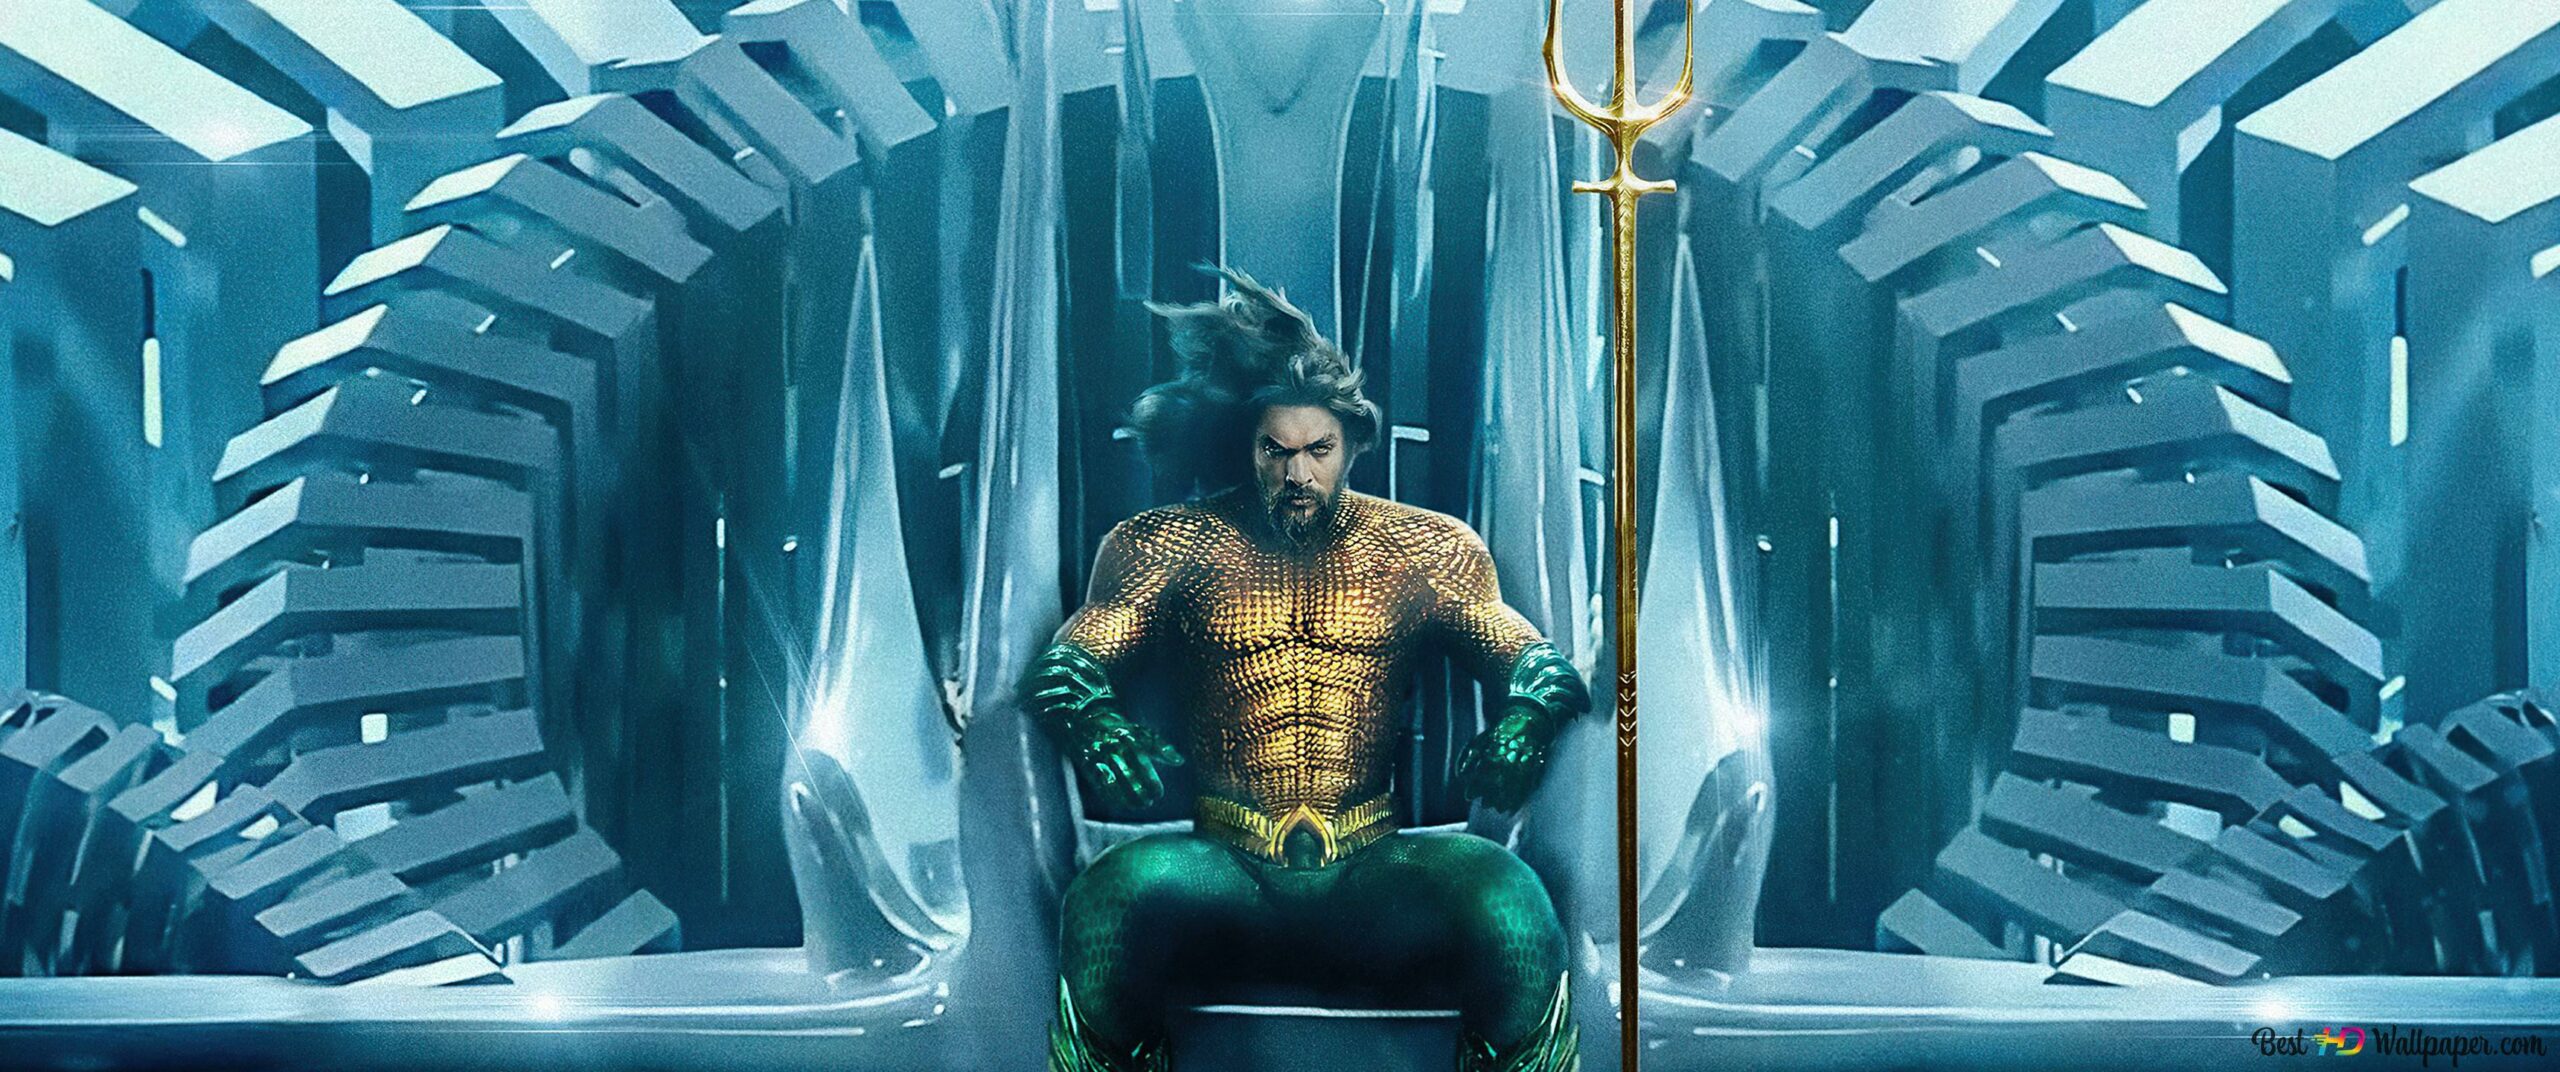 aquaman and the lost kingdom wallpaper scaled